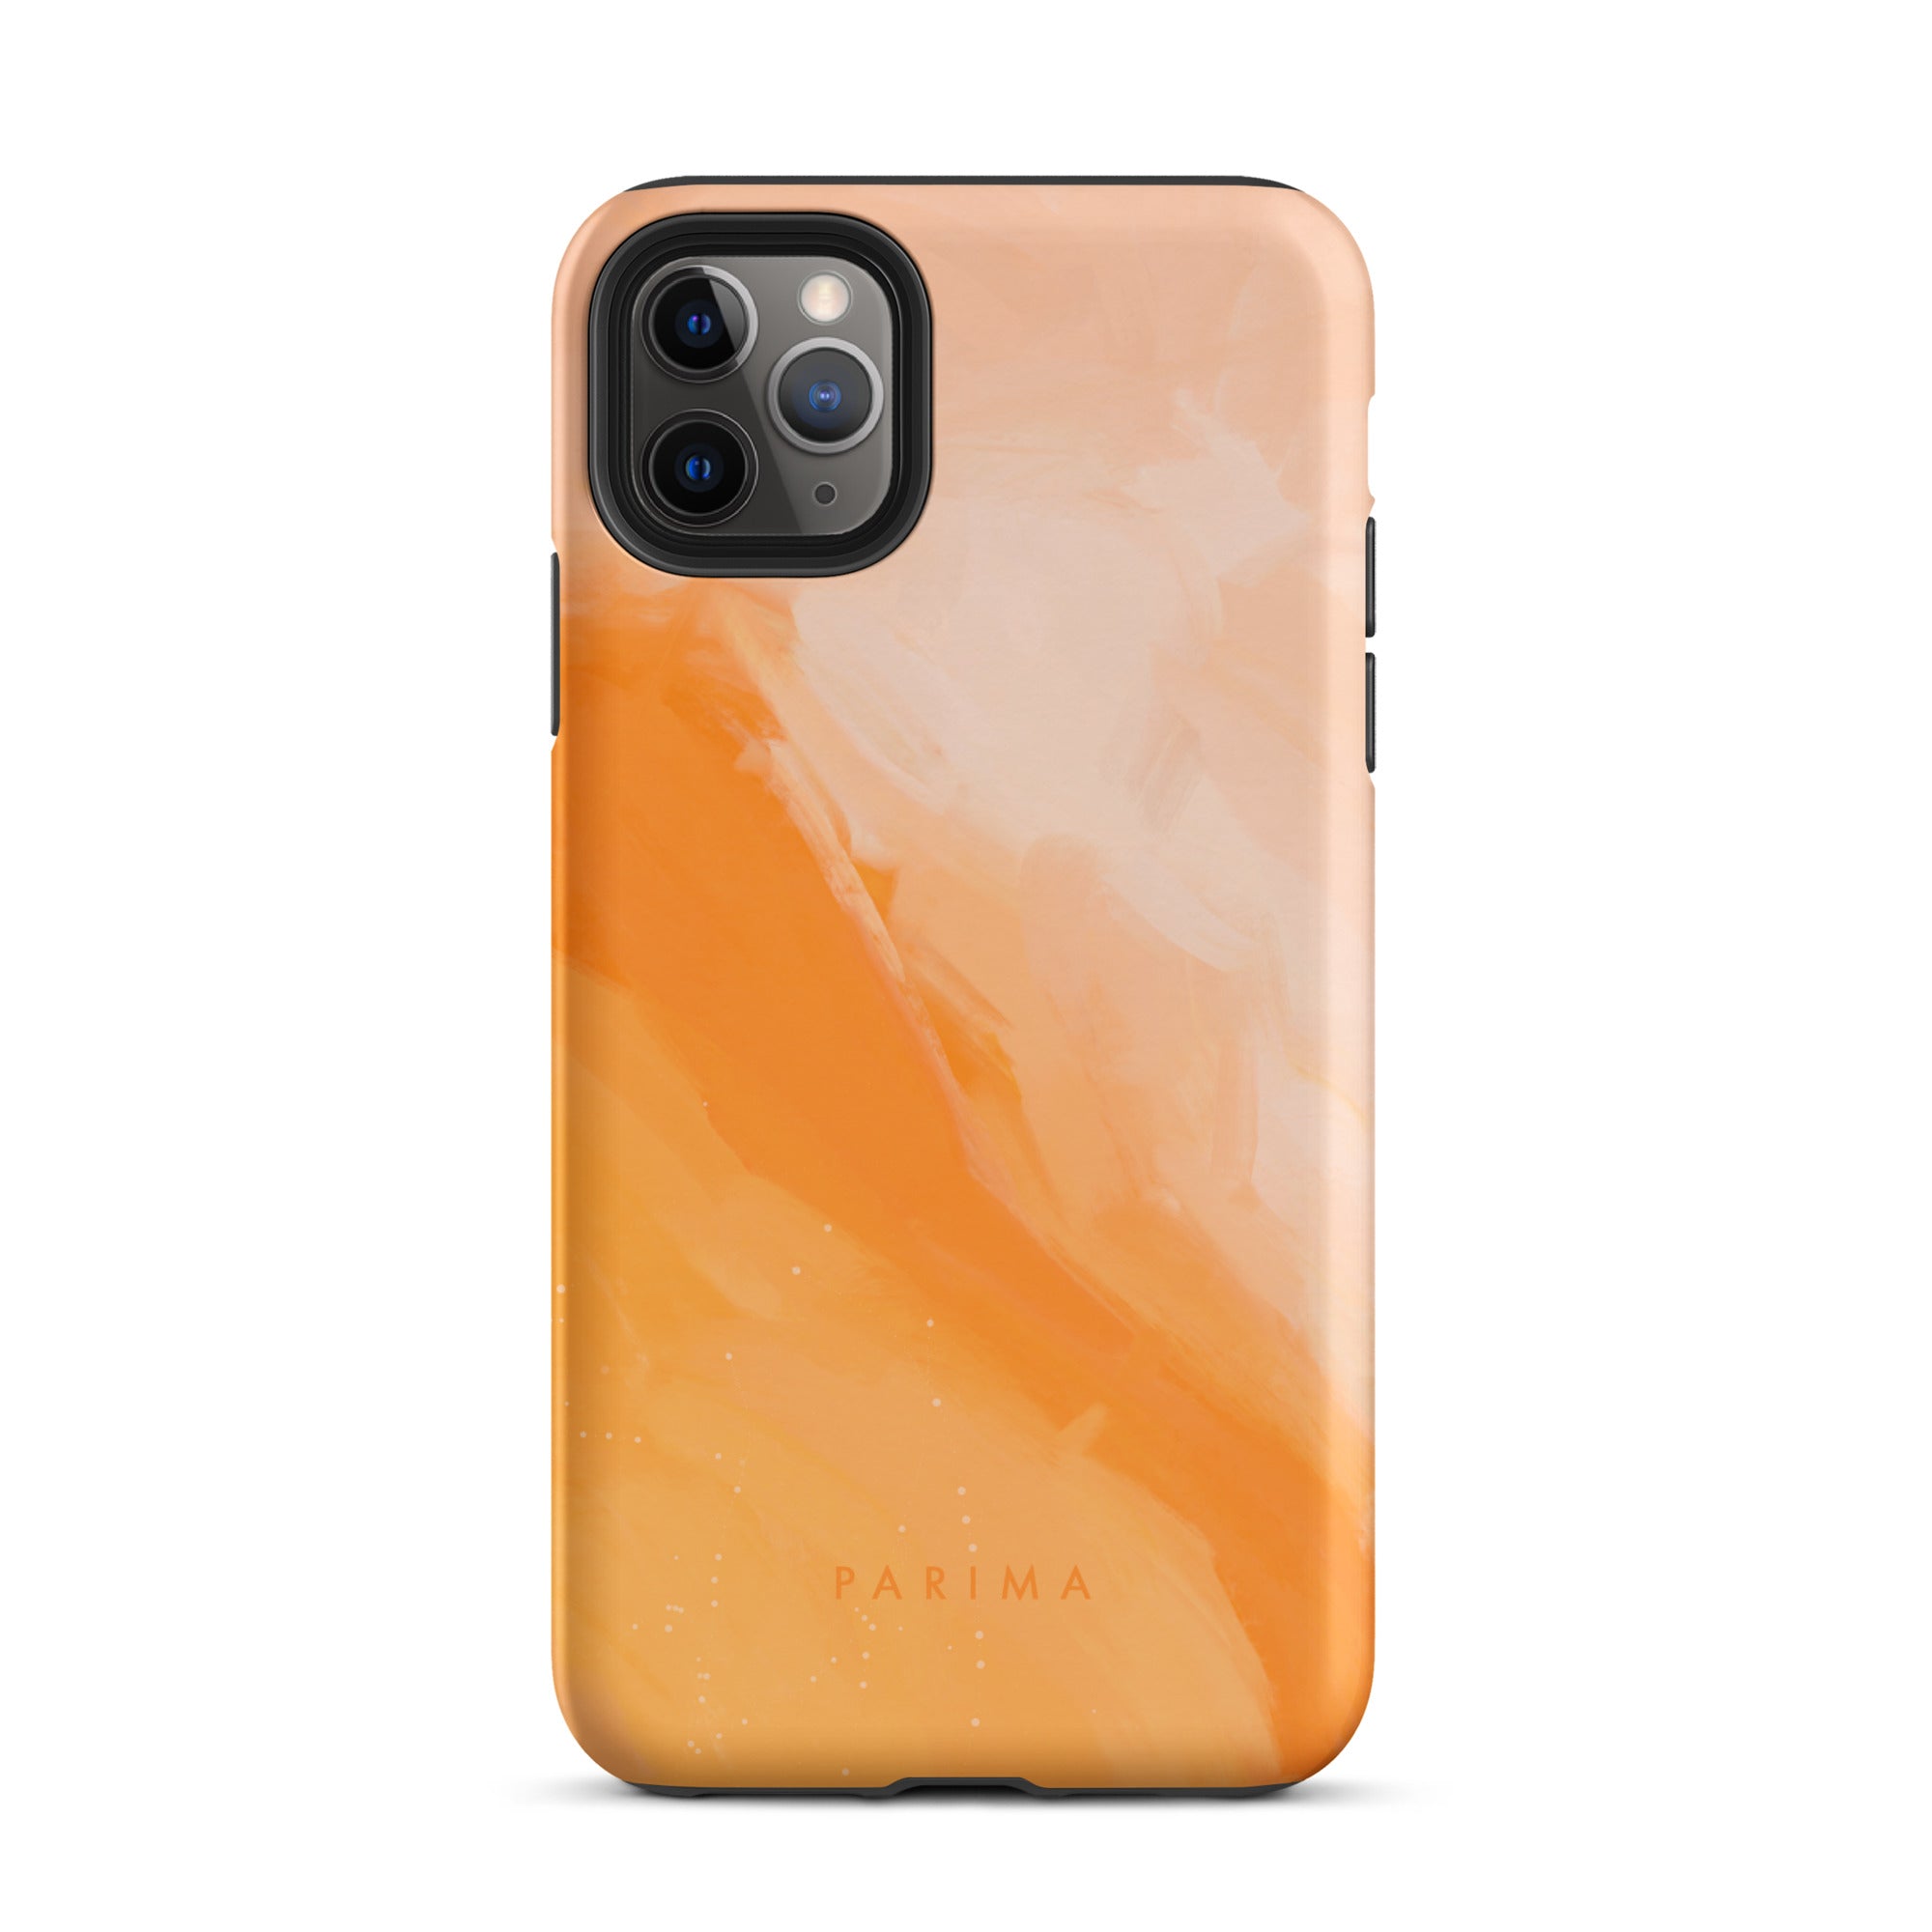 Sweet Orange, orange and pink abstract art on iPhone 11 Pro Max tough case by Parima Studio